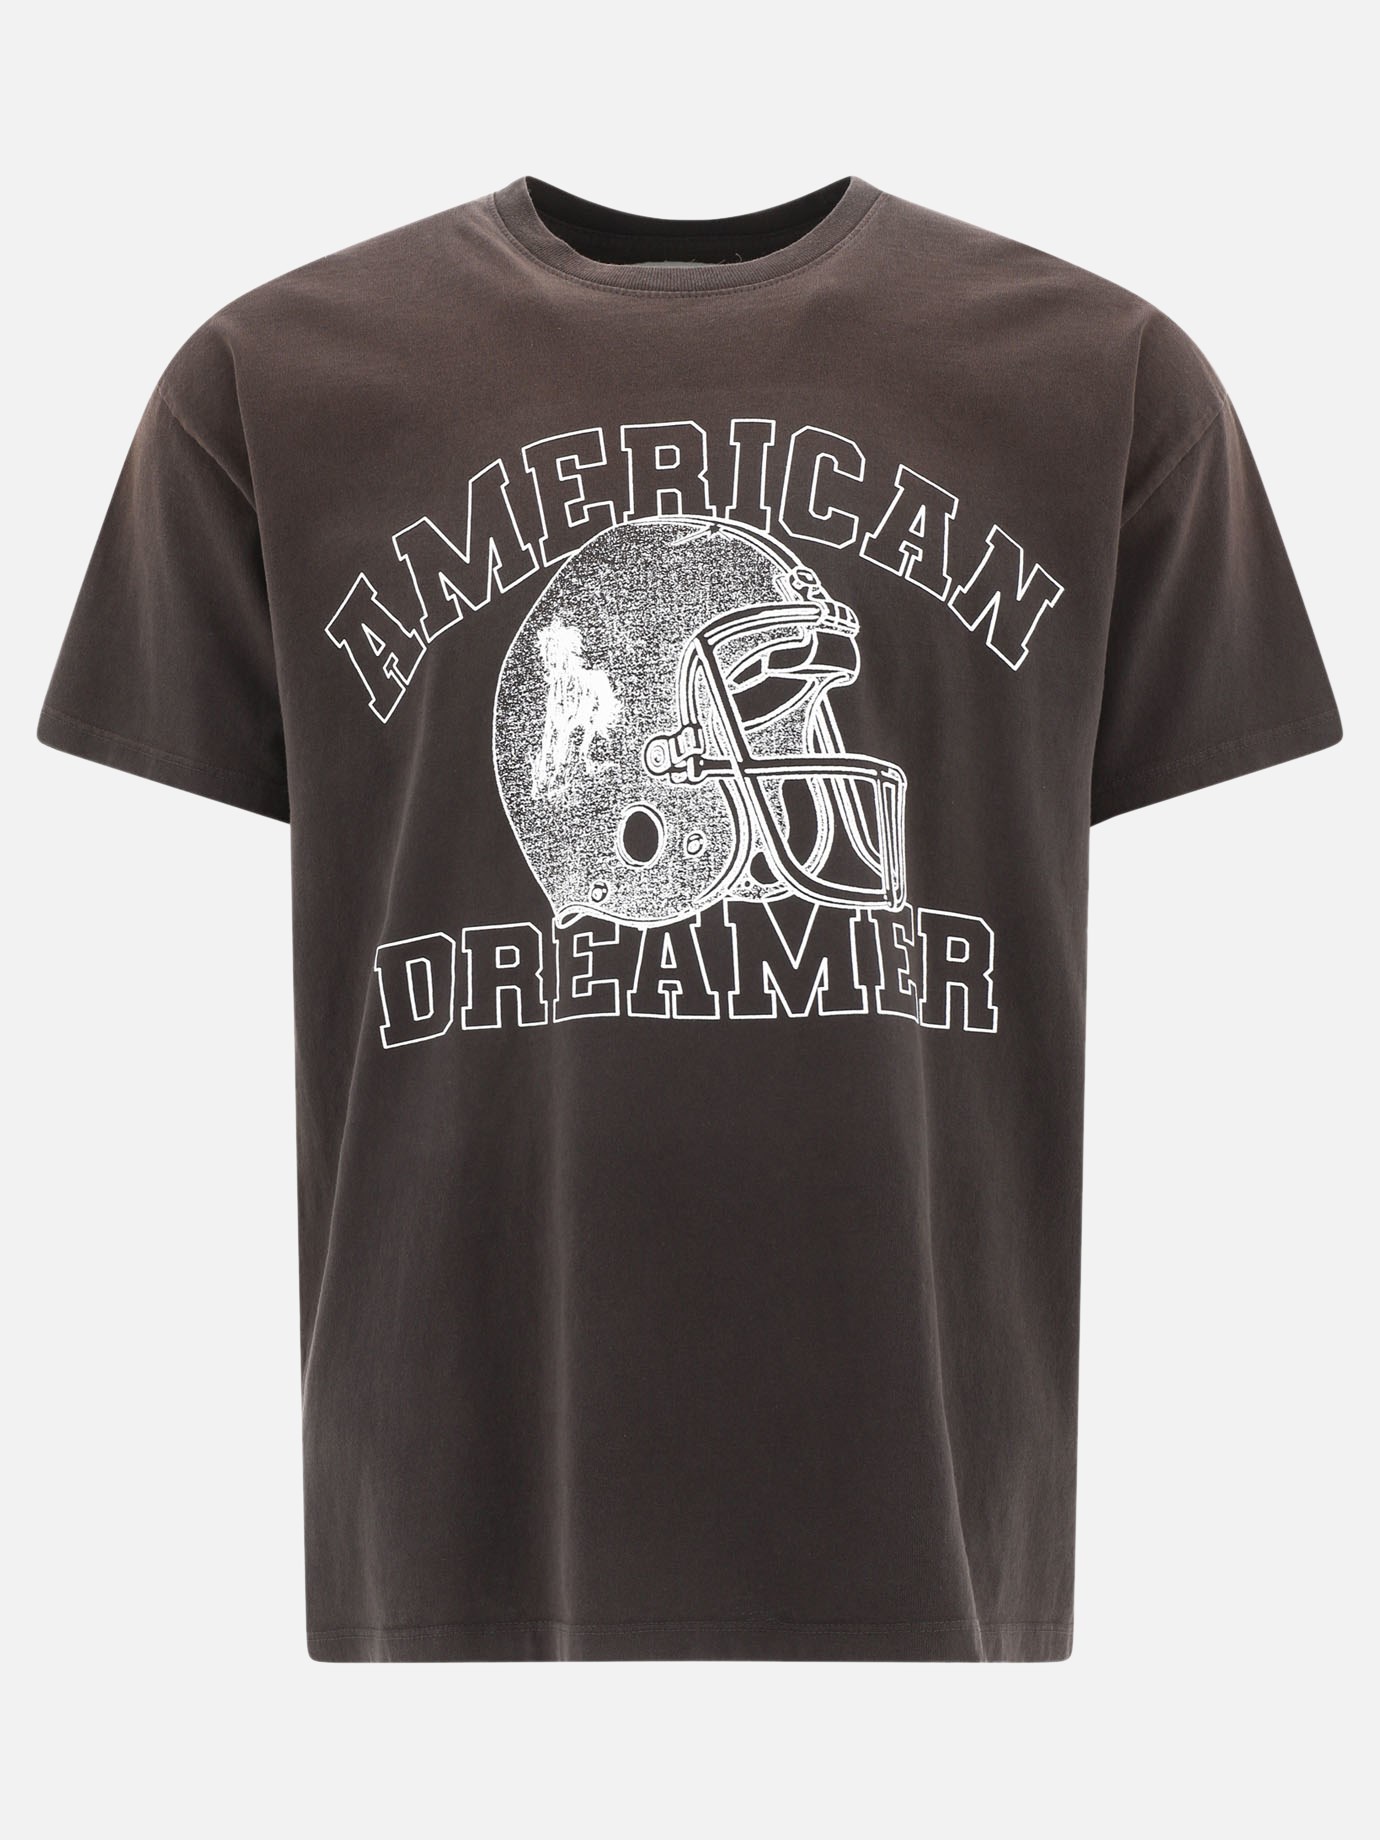  American Dreamer  t-shirtby One Of These Days - 4